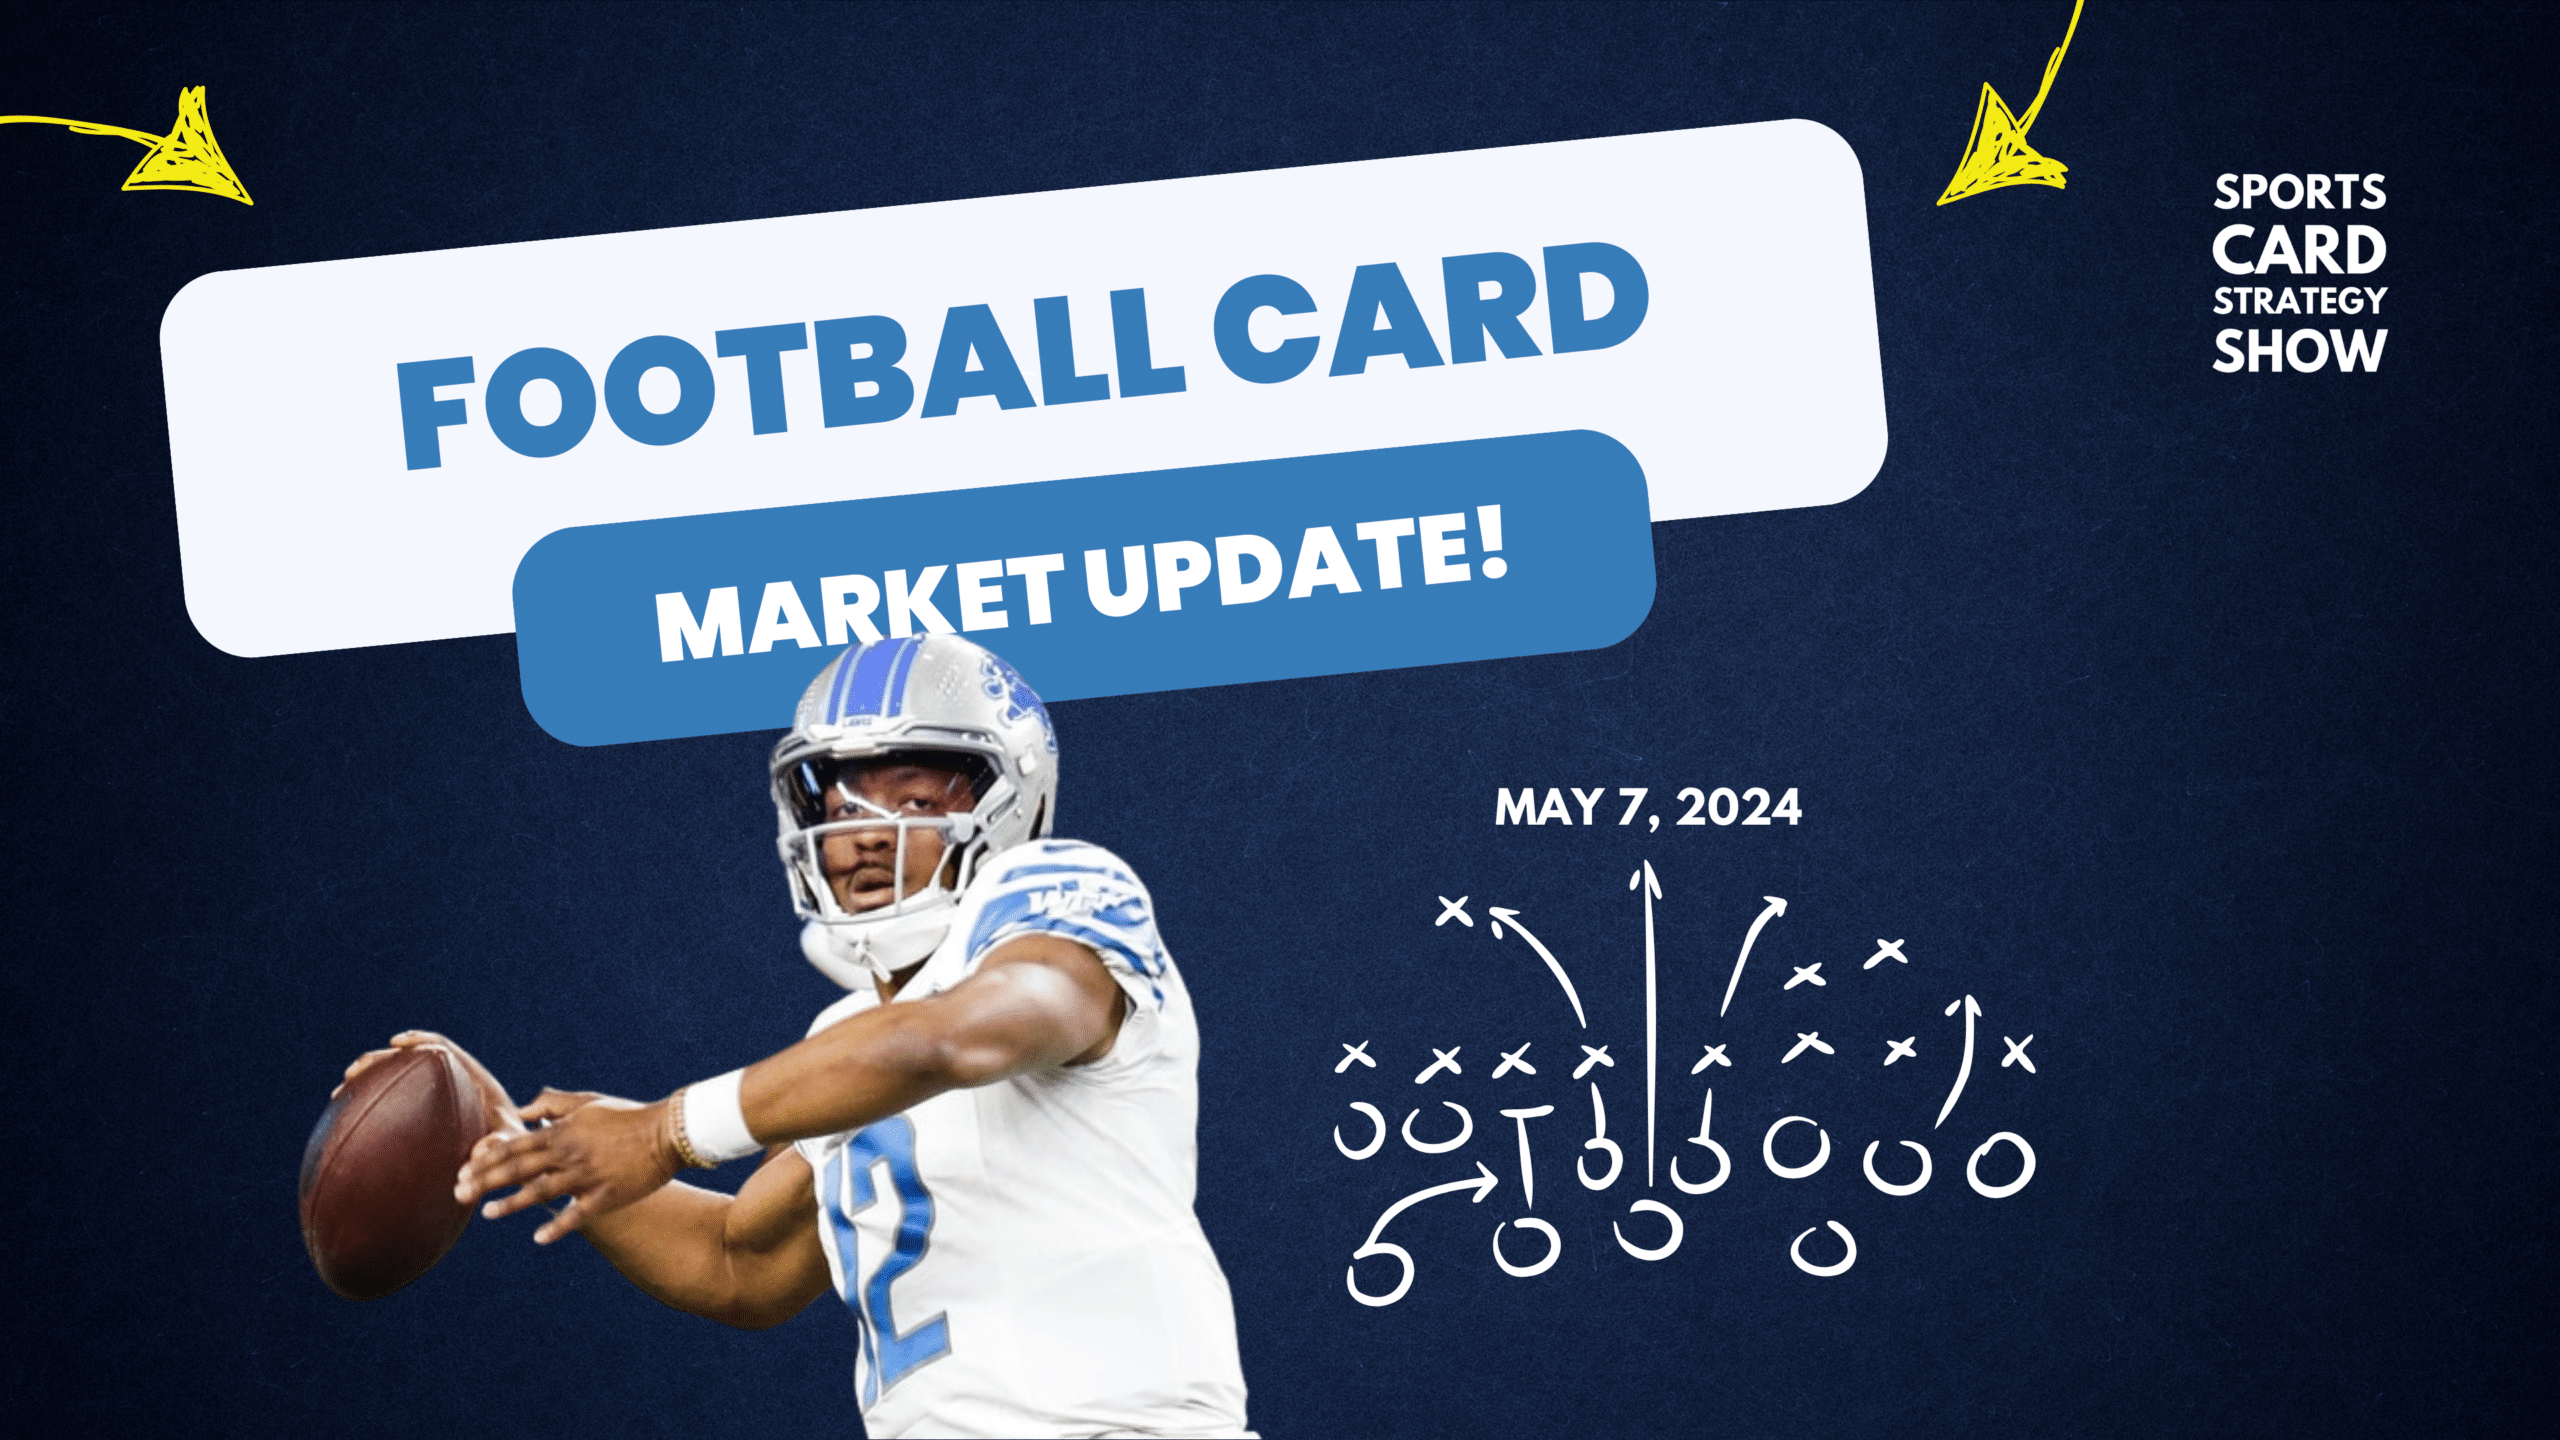 Football Card Market Update - Tuesday, May 7 2024